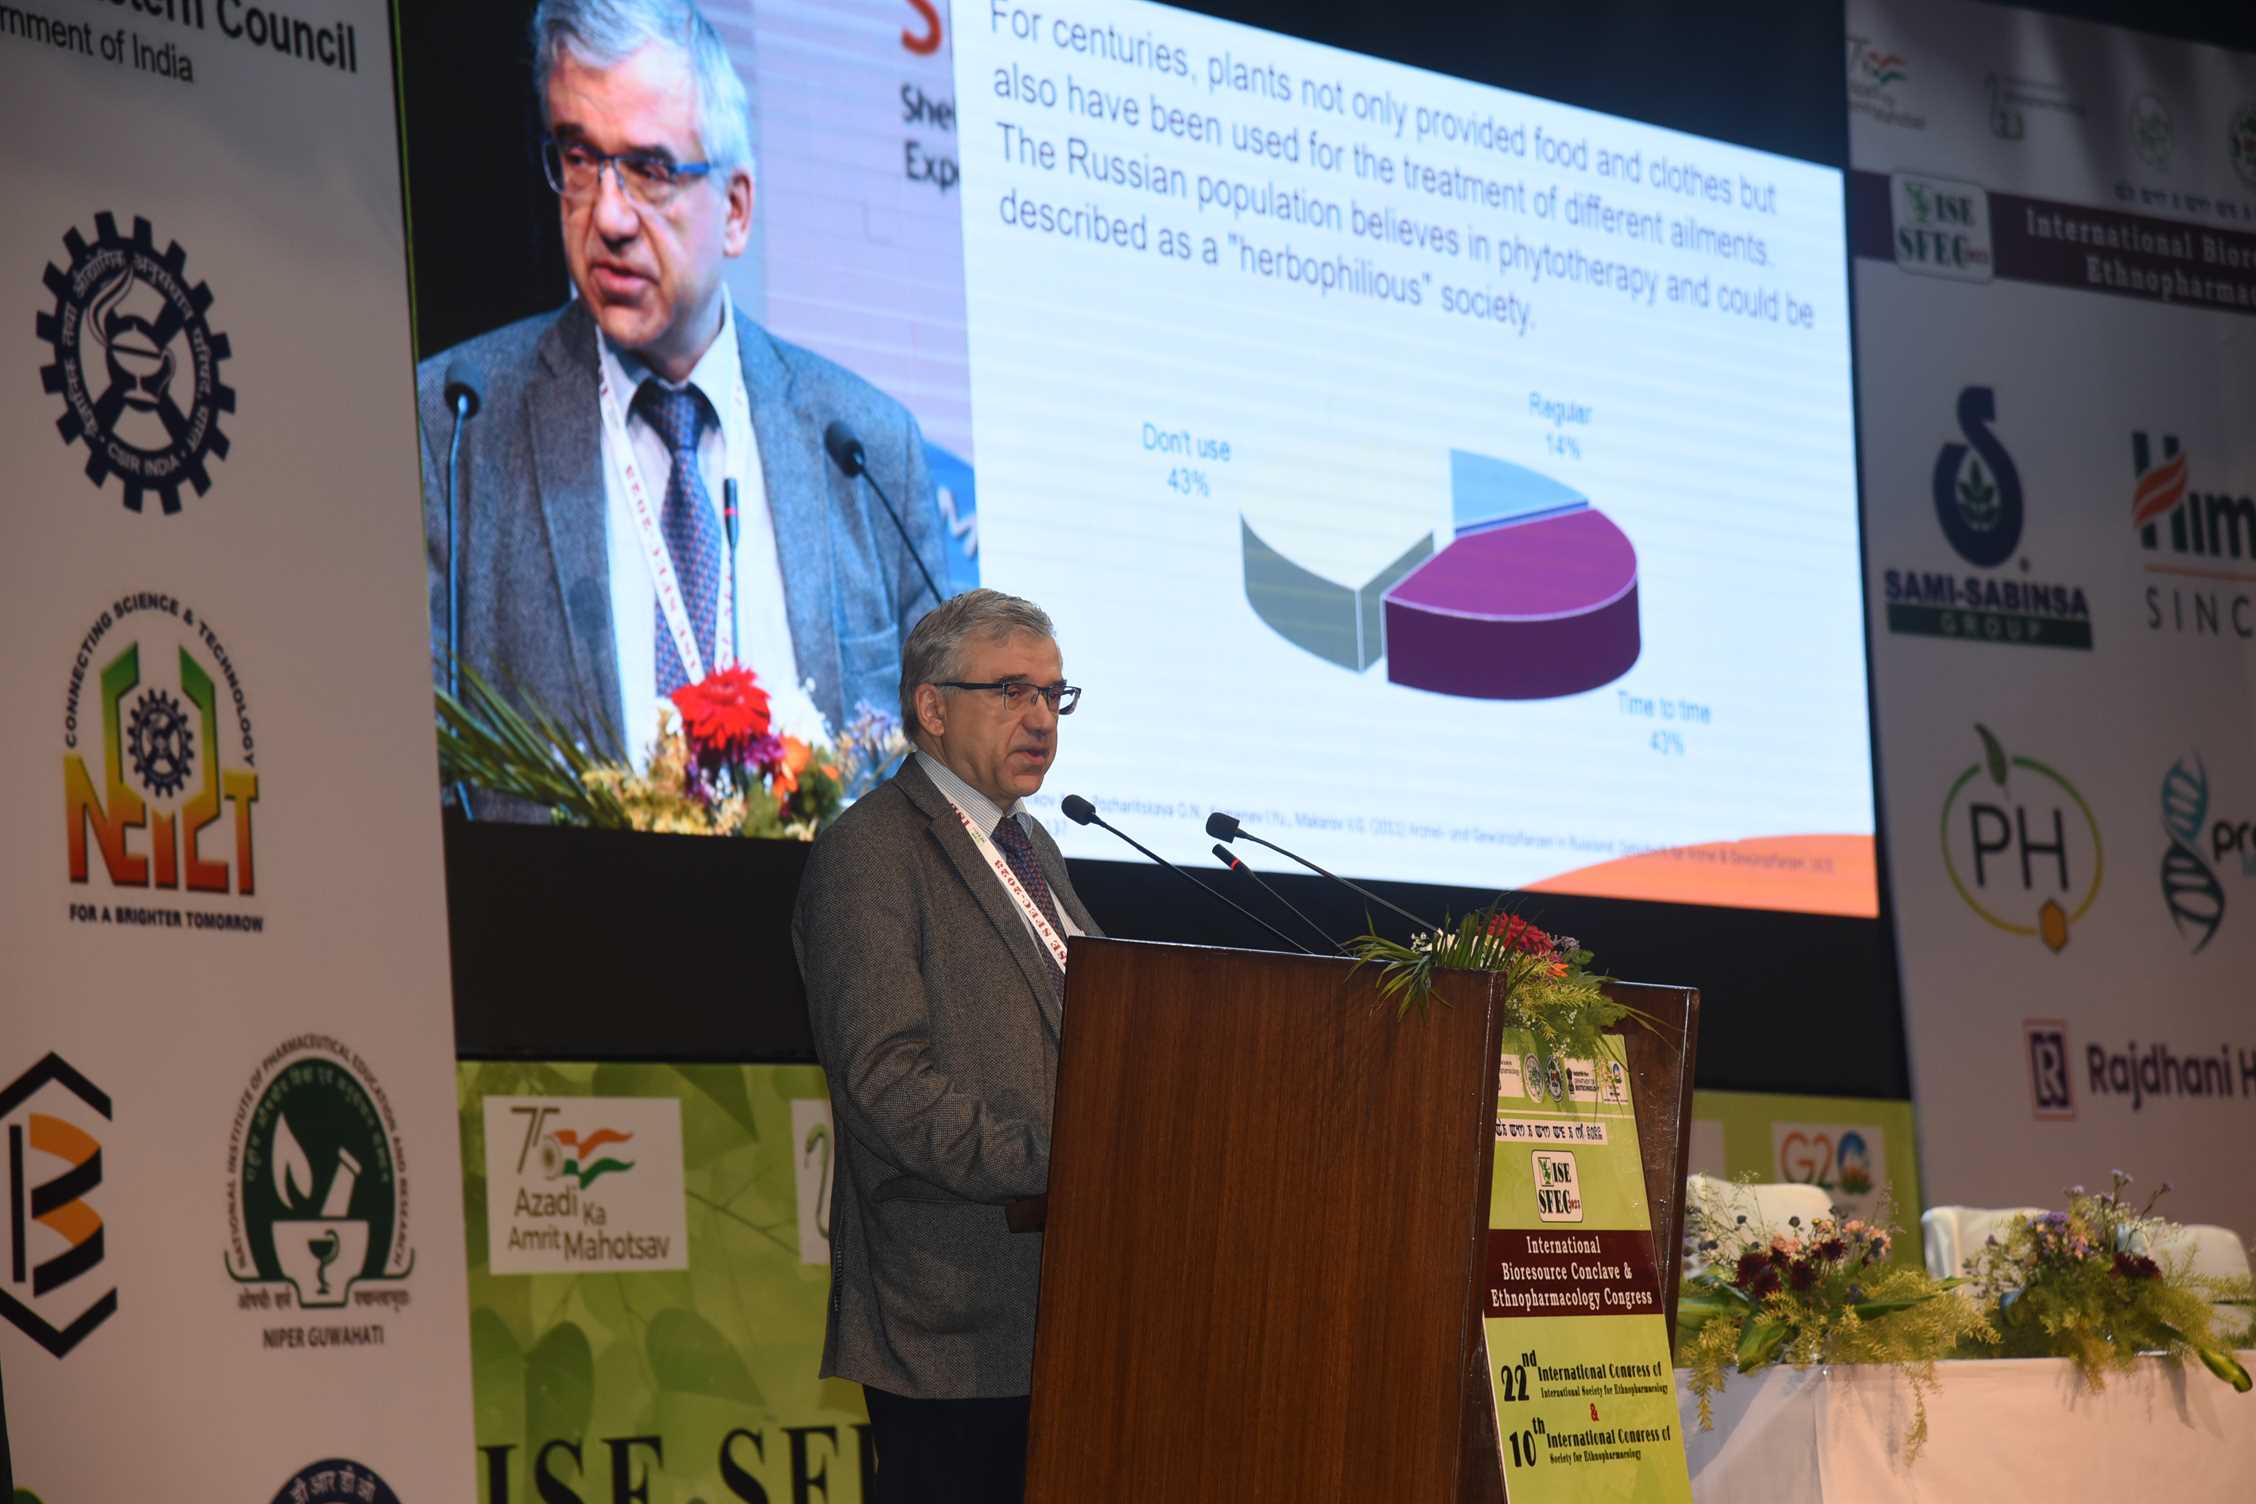 22nd International Congress of International Society for Ethnopharmacology (ISE) & the 10th International Congress of the Society for Ethnopharmacology (SFE), India (ISE-SFEC 2023)photos